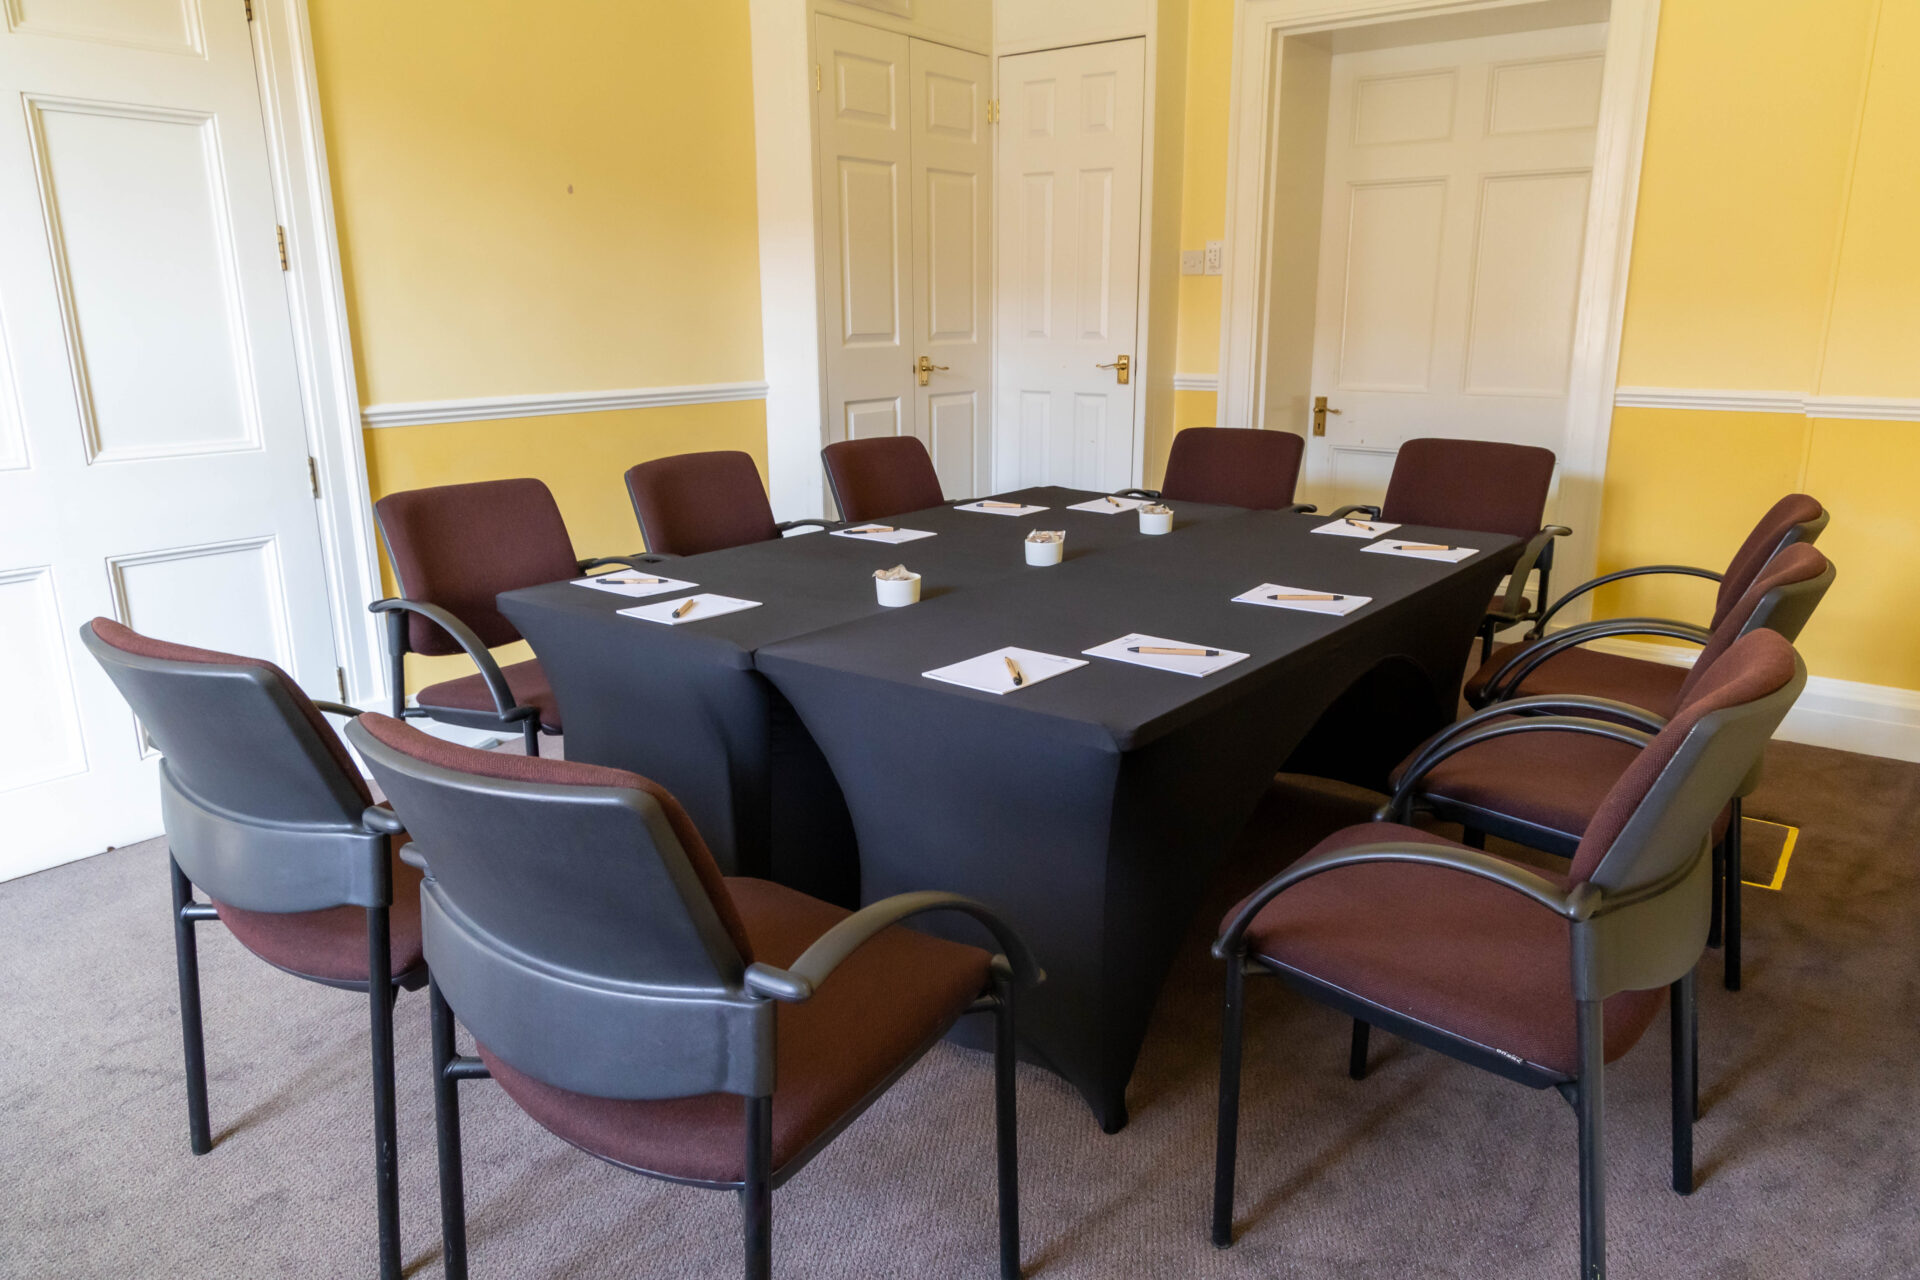 The Windham breakout room, laid out to accommodate up to ten people.